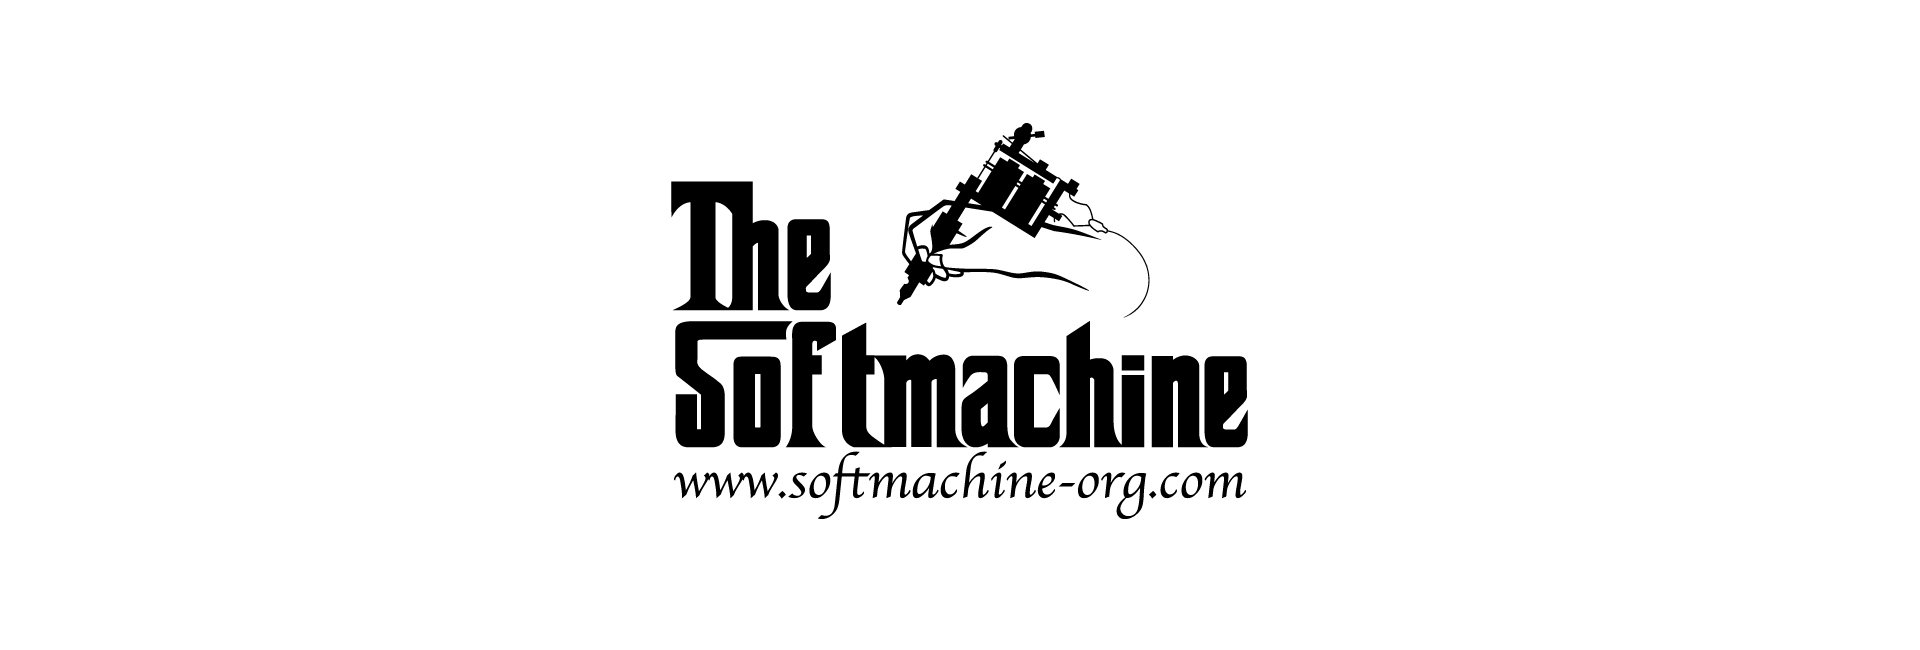 SOFTMACHINE(ソフトマシーン) - CANVAS CLOTHING ONLINE STORE / 39 